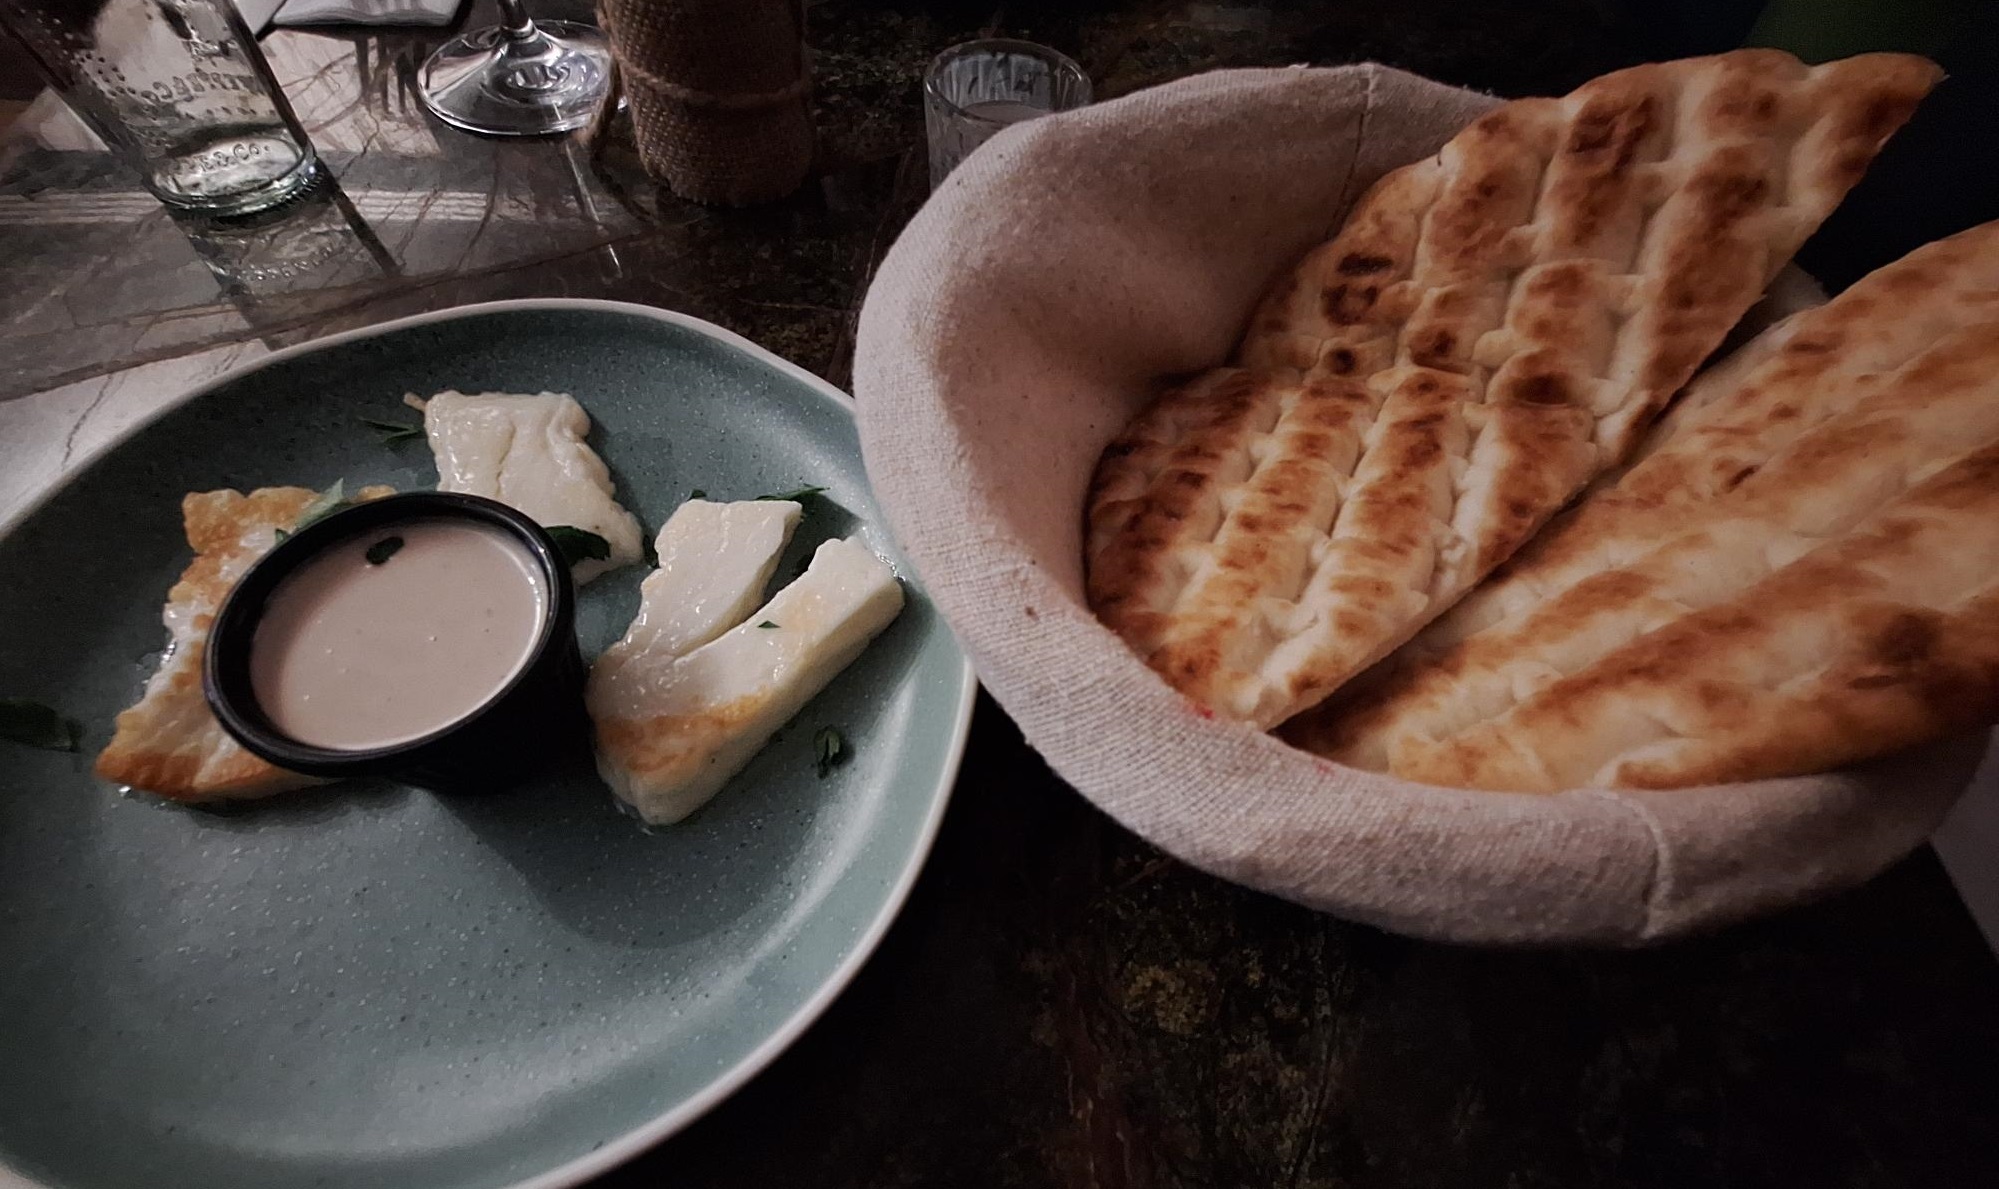 The grilled halloumi starter with tahini and bread straight from the oven